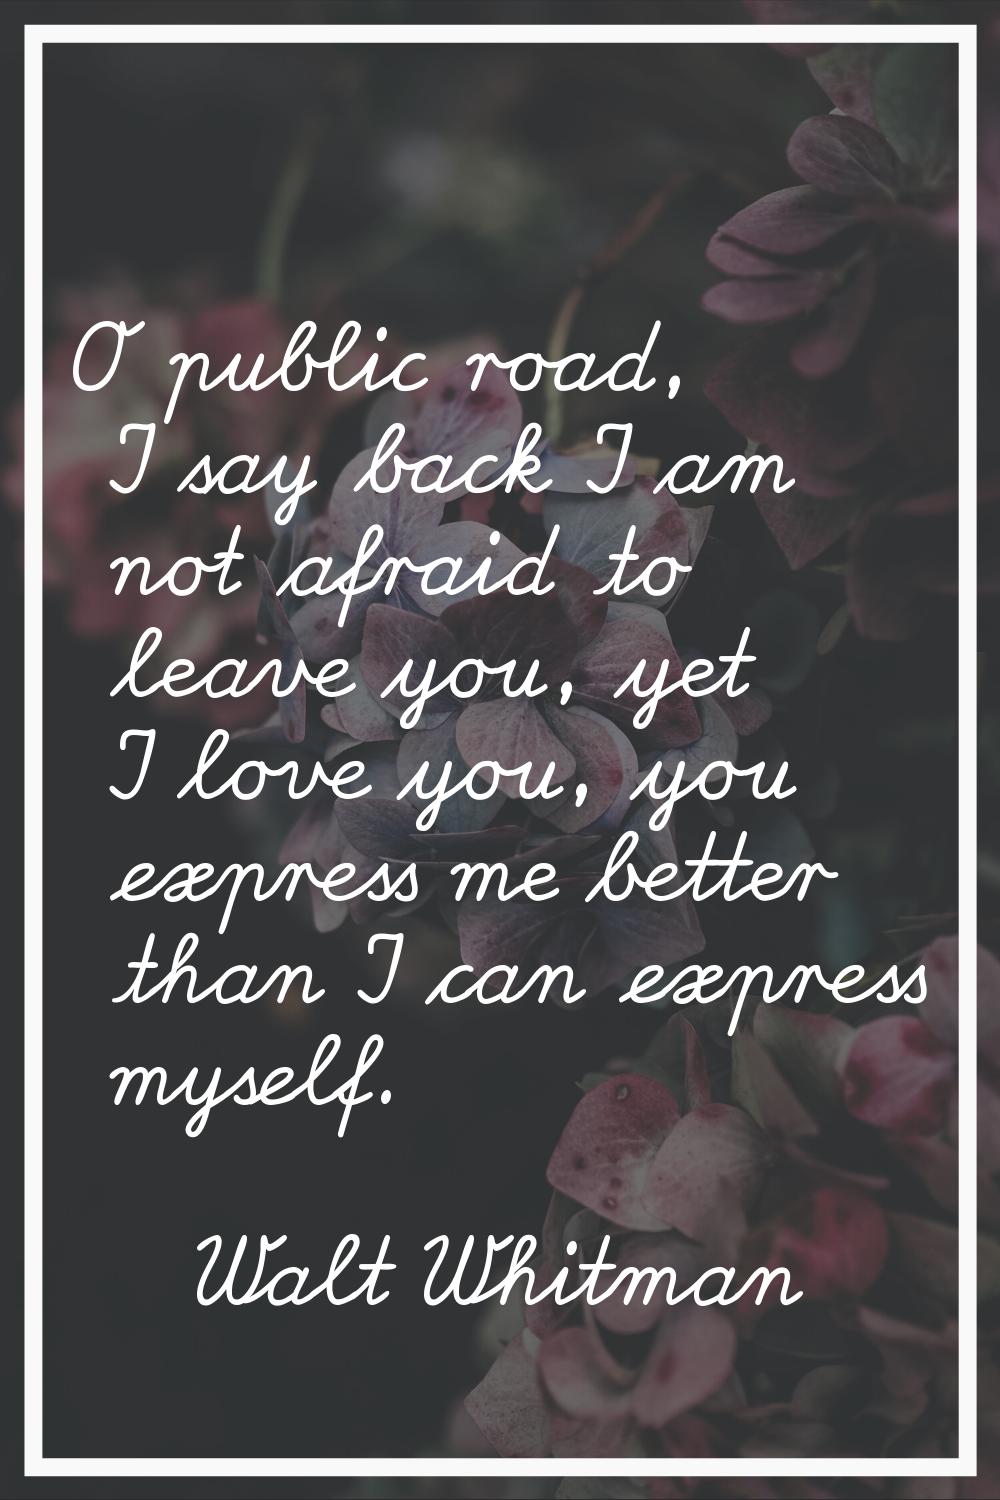 O public road, I say back I am not afraid to leave you, yet I love you, you express me better than 